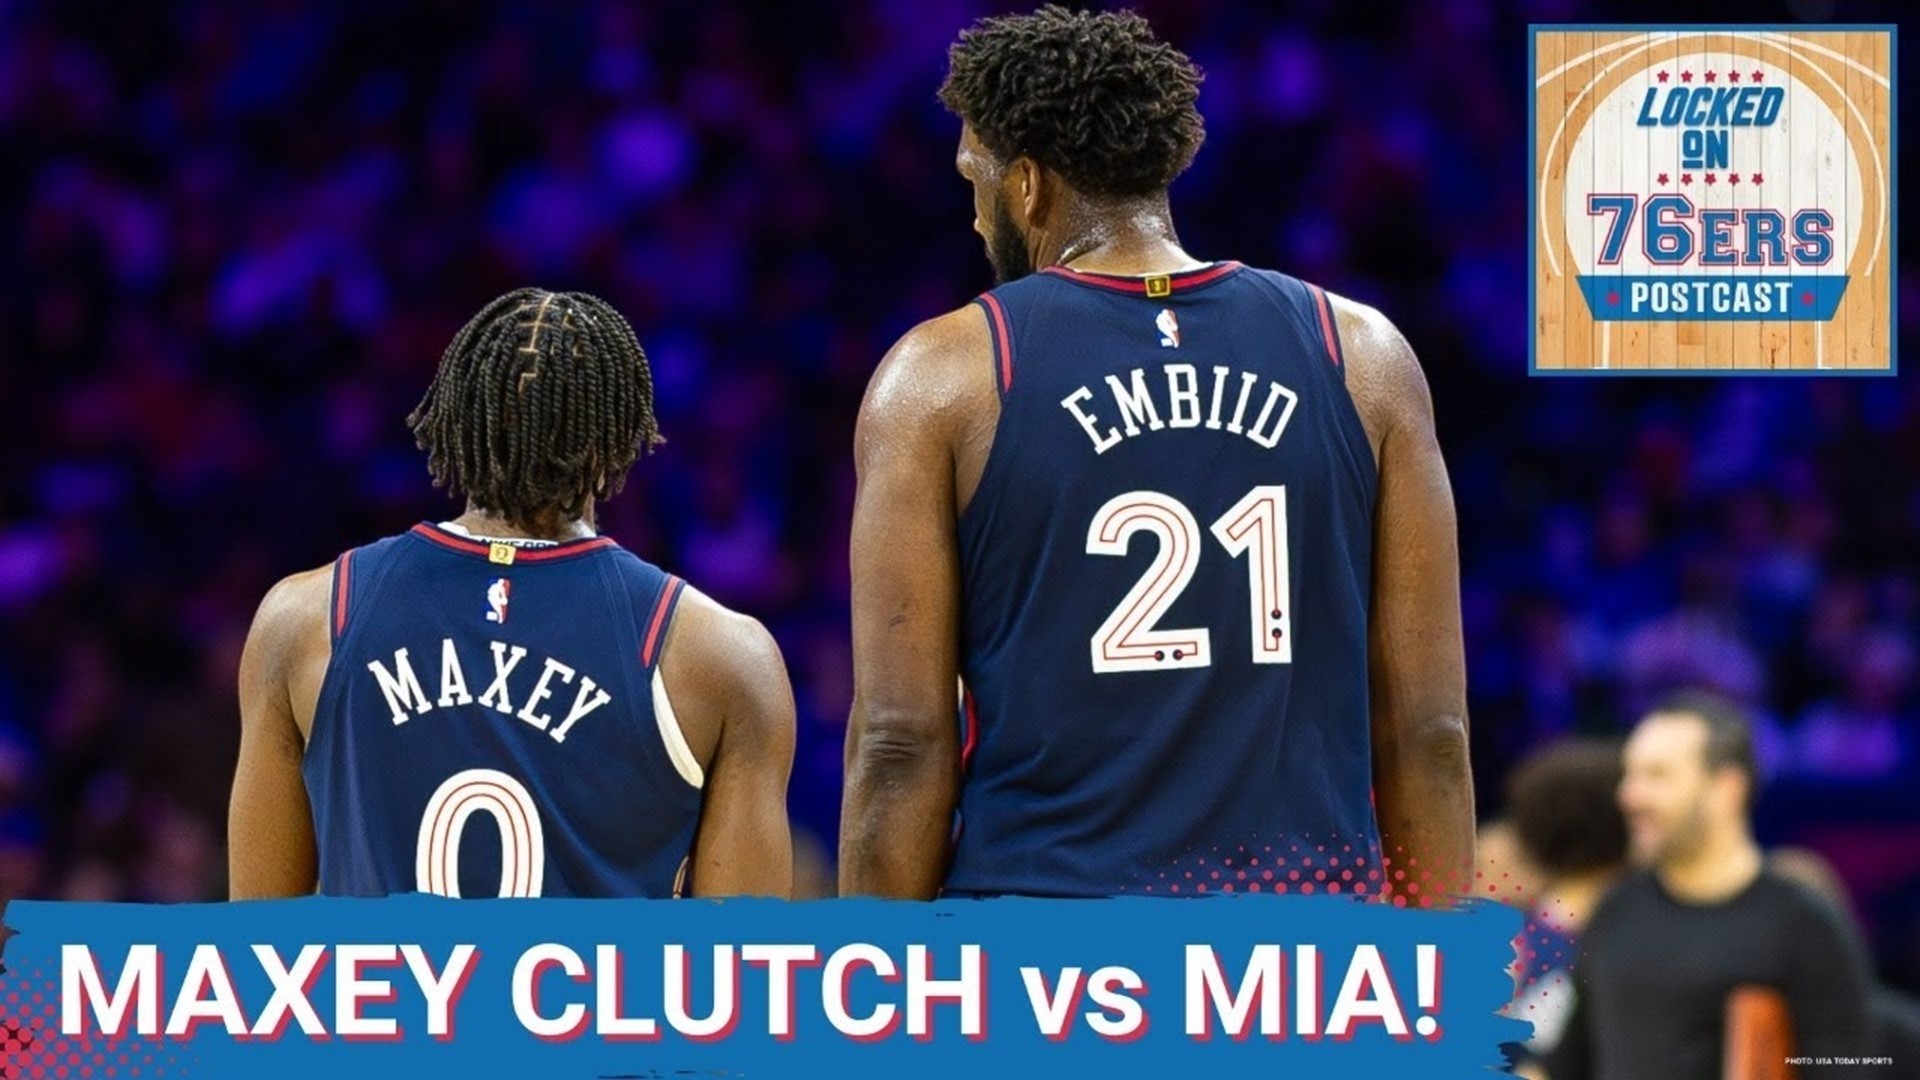 Tyrese Maxey made his return from hip tightness to score 37pts and come up just a rebound shy of a triple-double, to help the 76ers beat the Miami Heat 109-105.